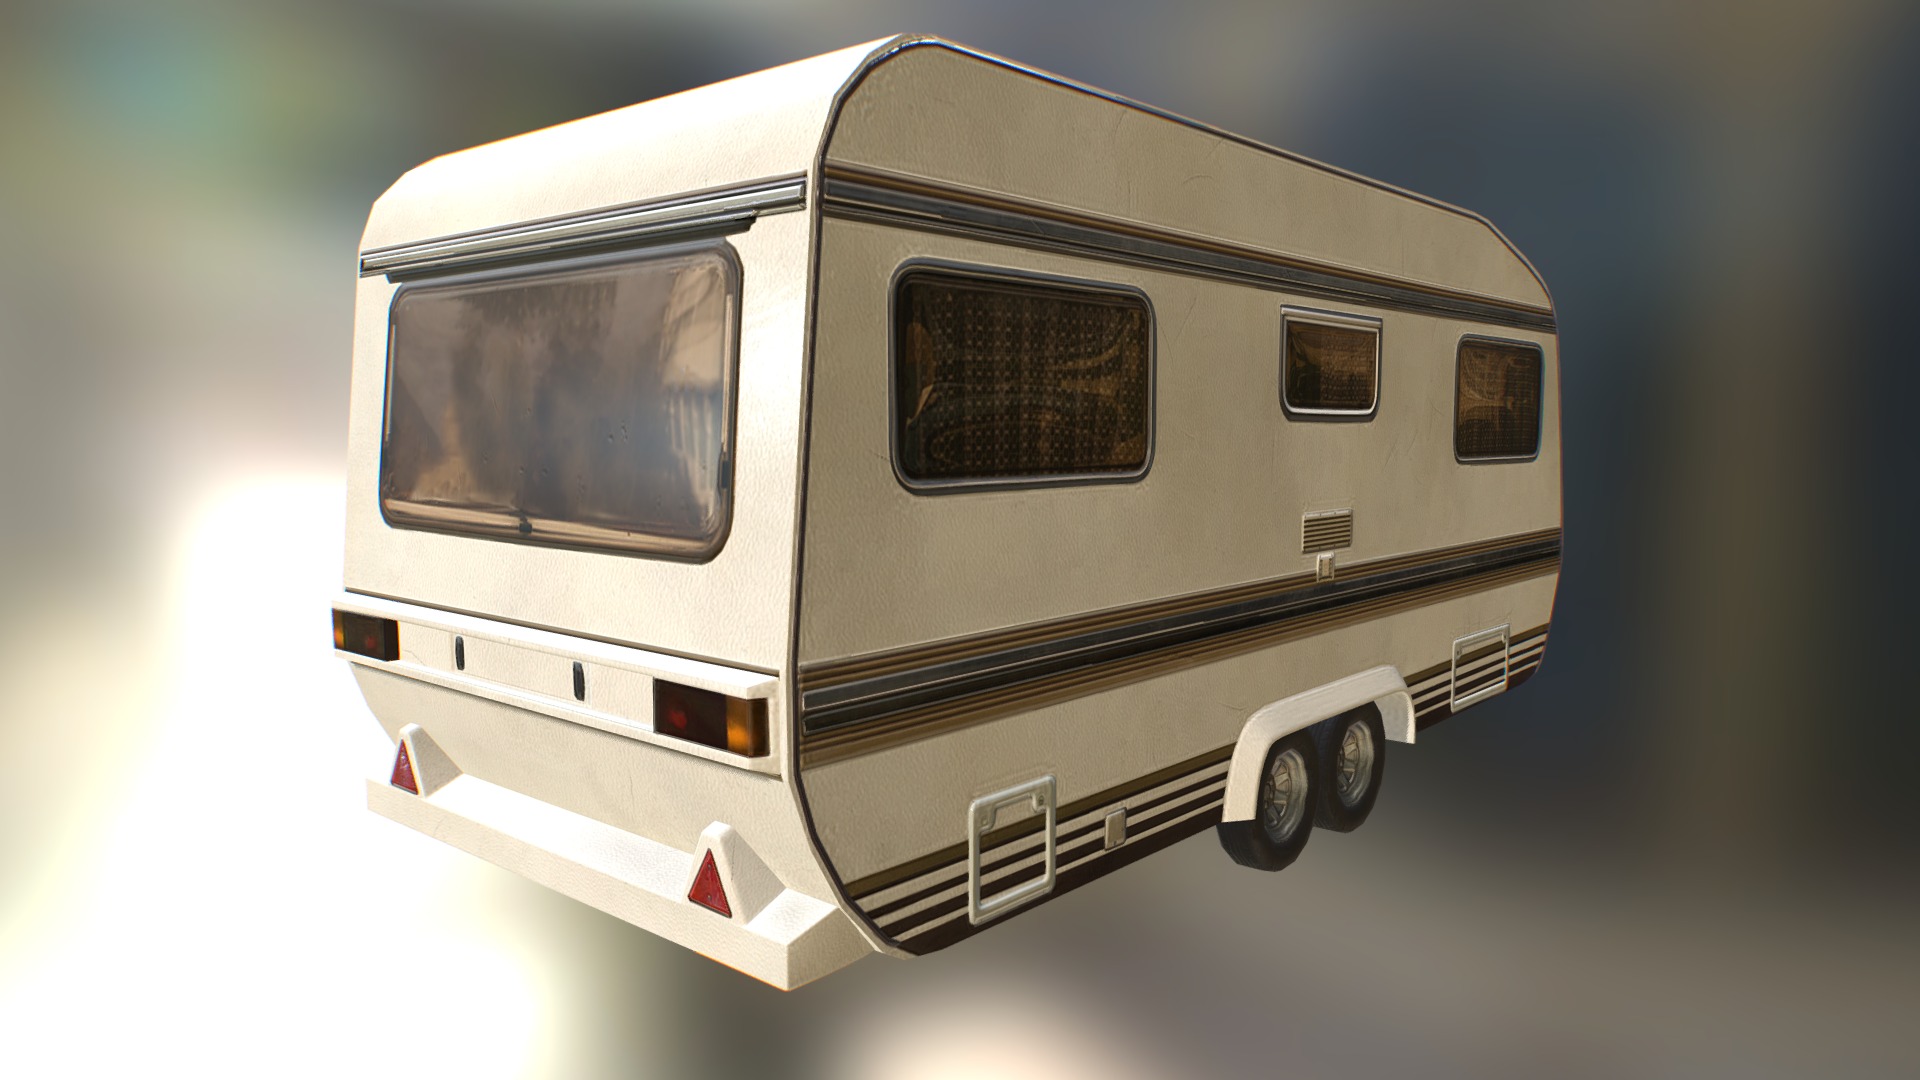 3D model RV Caravan lowpoly model - This is a 3D model of the RV Caravan lowpoly model. The 3D model is about a white van with a window.